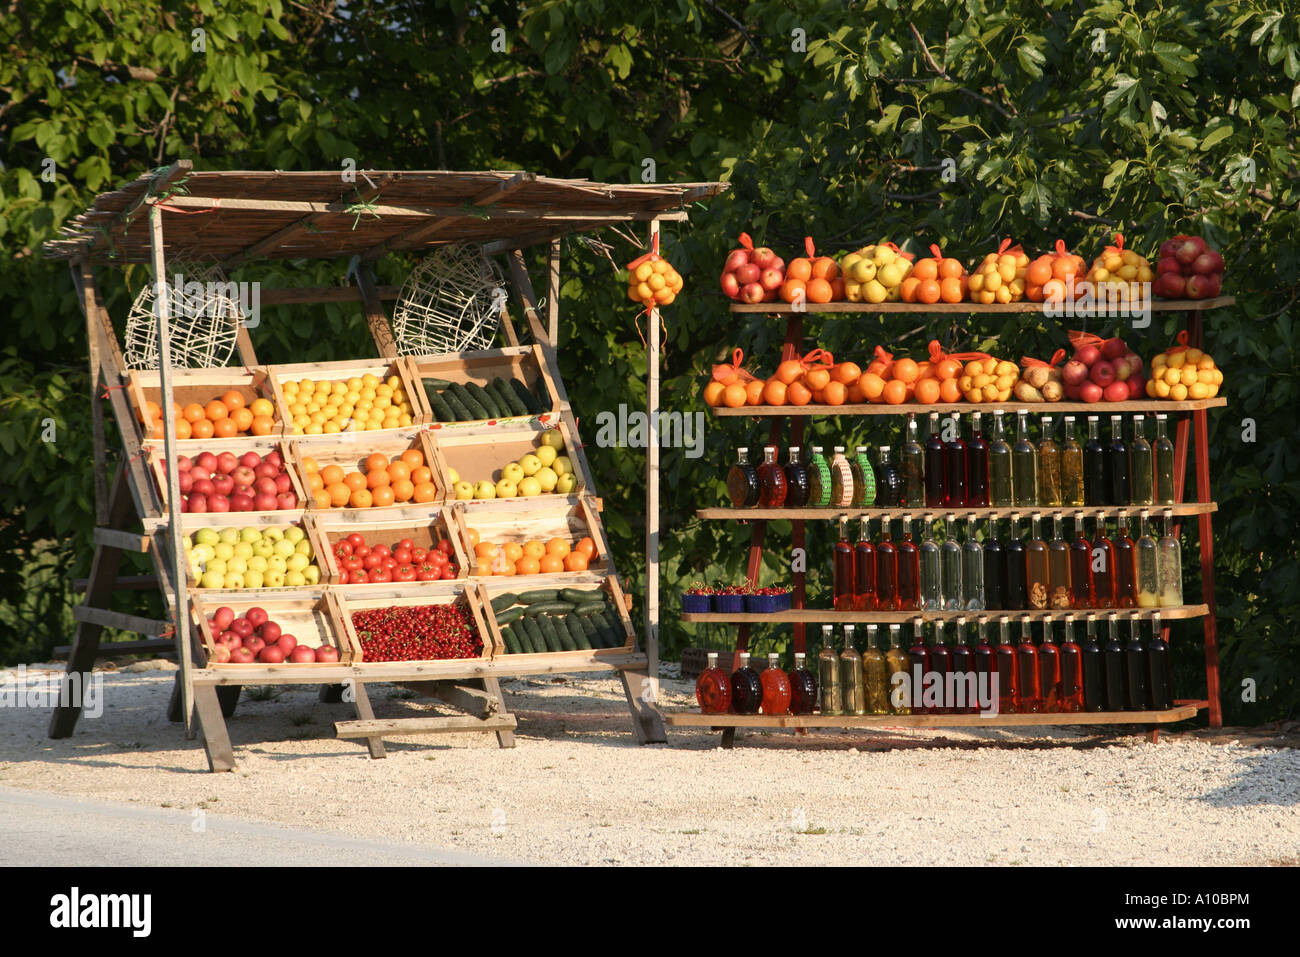 Local fruit and fruit based liquors for sale near Opuzen on the road to Dubrovnik Stock Photo